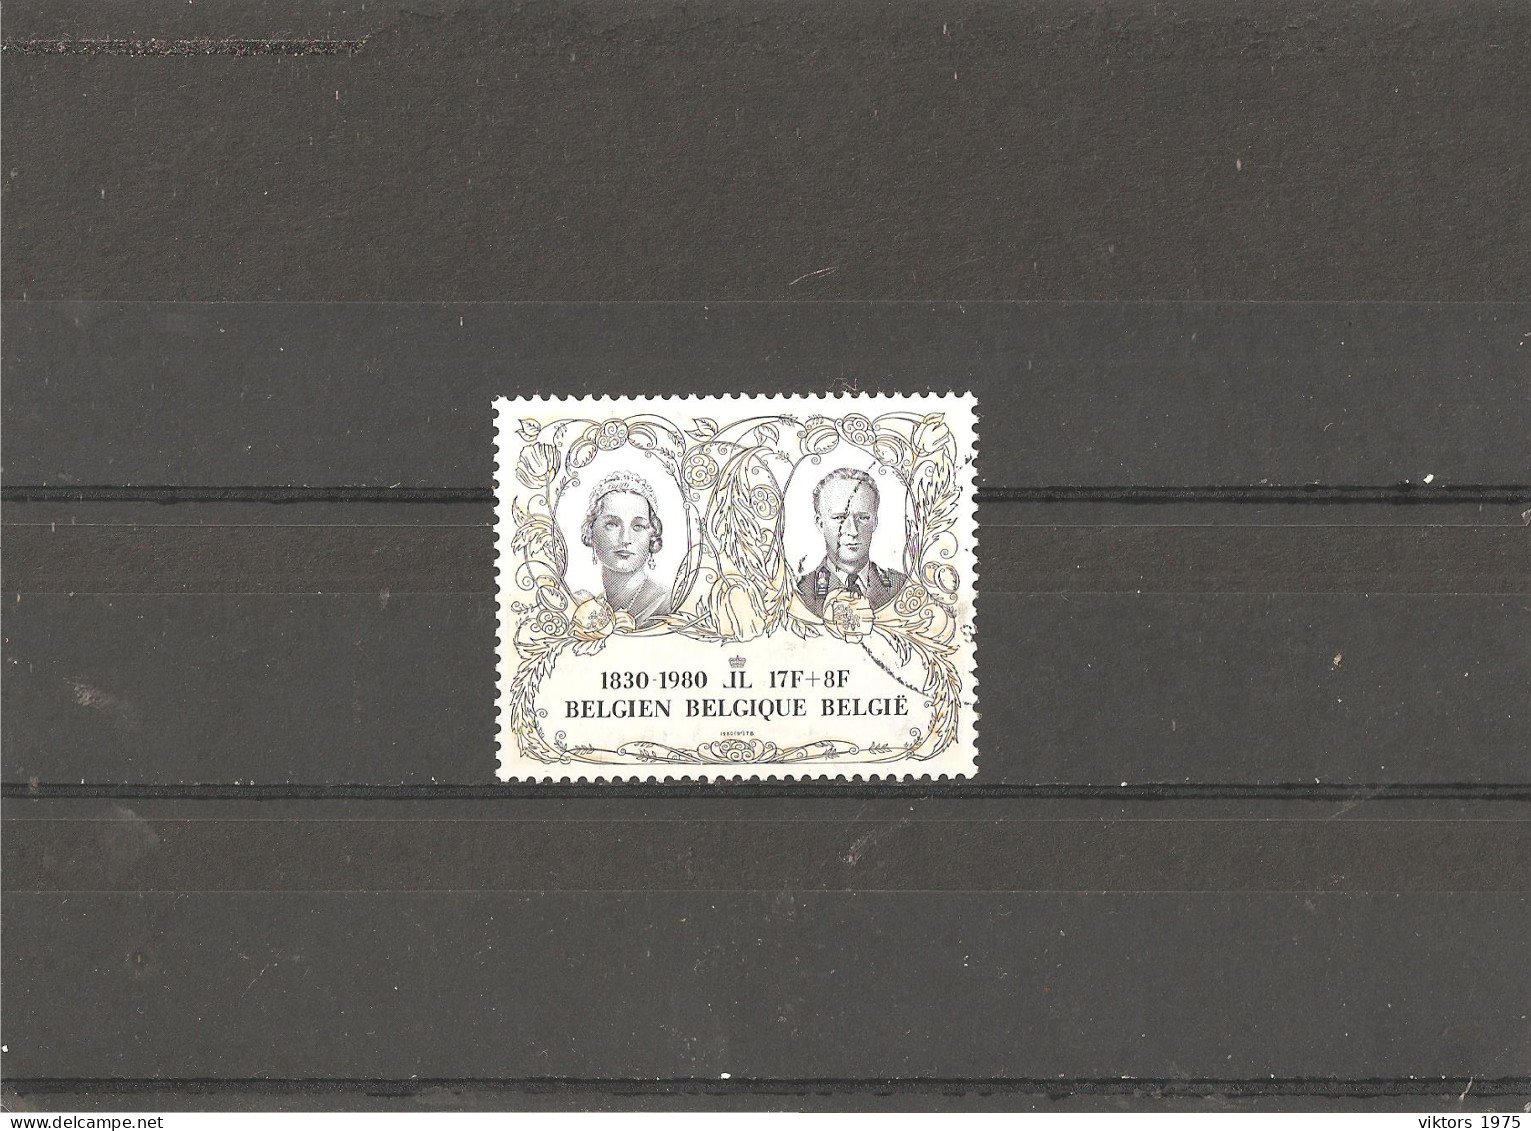 Used Stamp Nr.2032 In MICHEL Catalog - Used Stamps